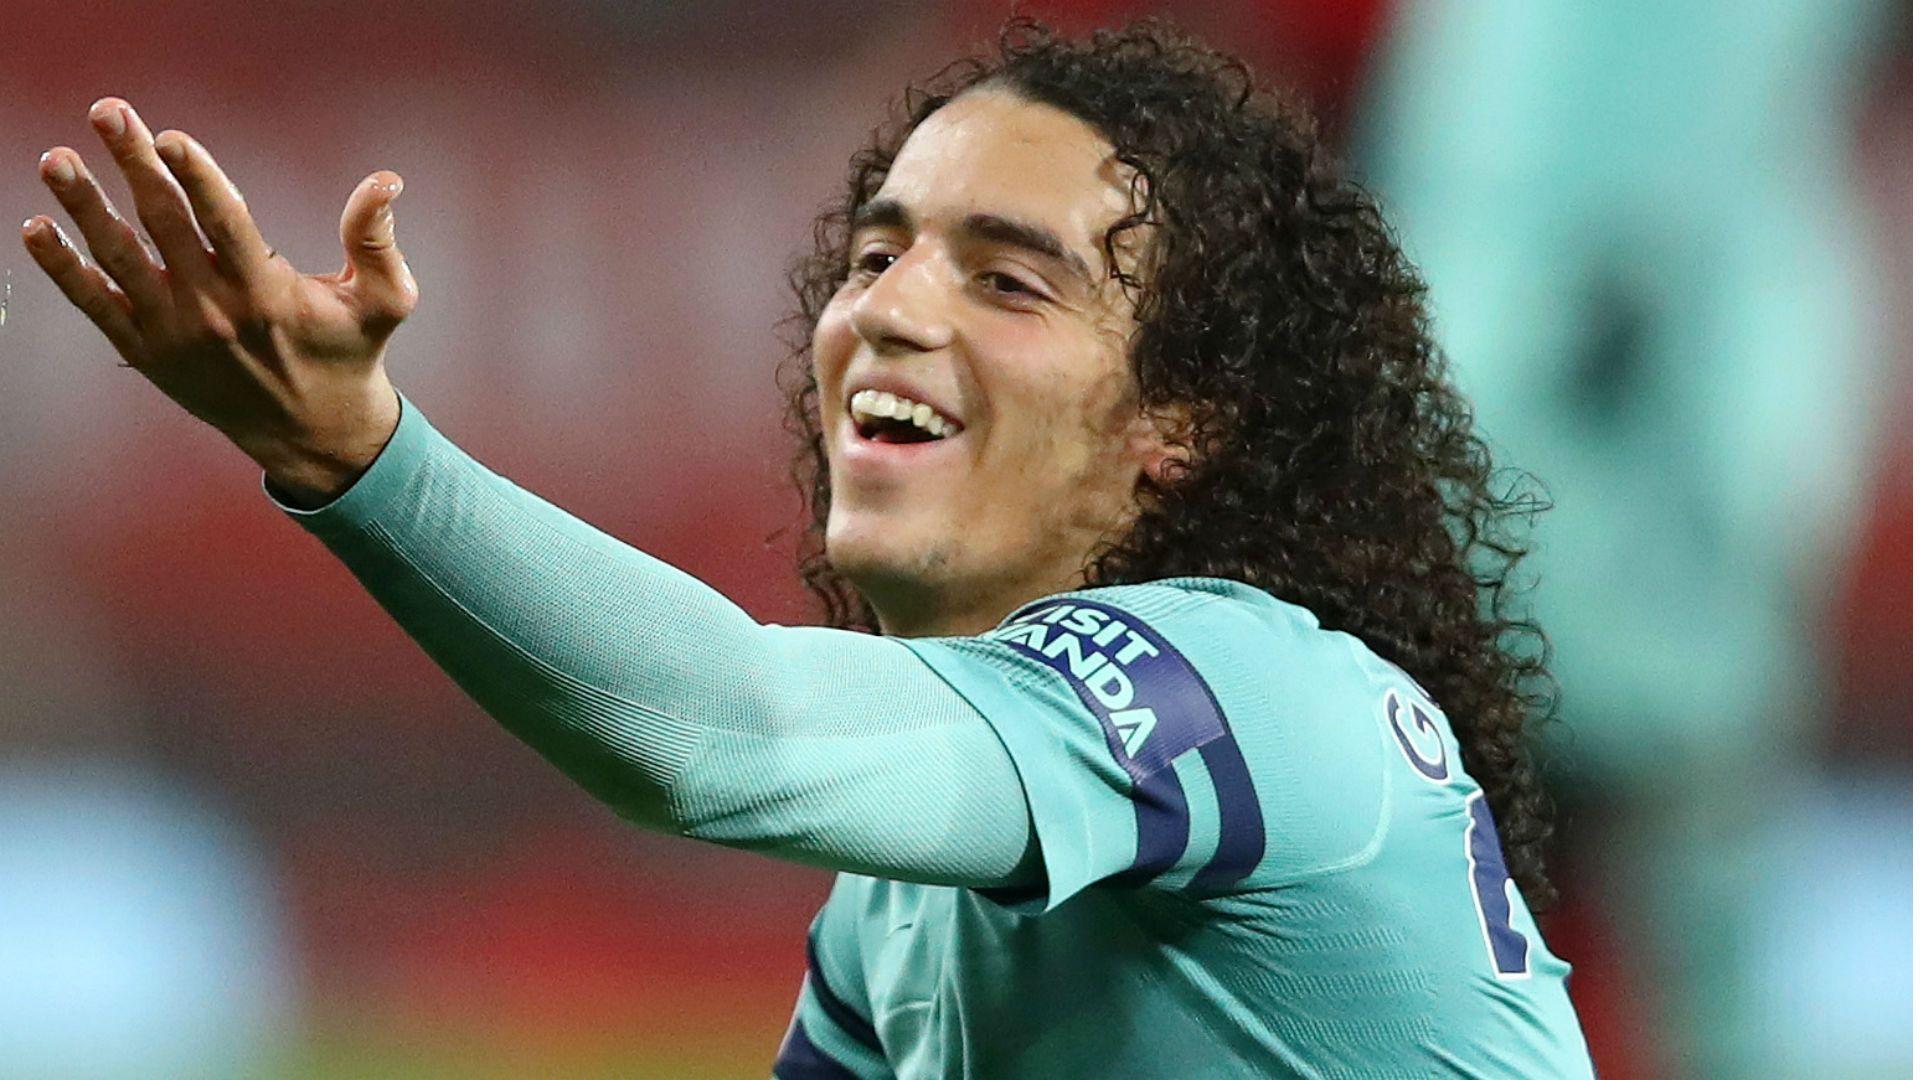 Guendouzi for the chop? Emery suggests midfielder should cut his hair